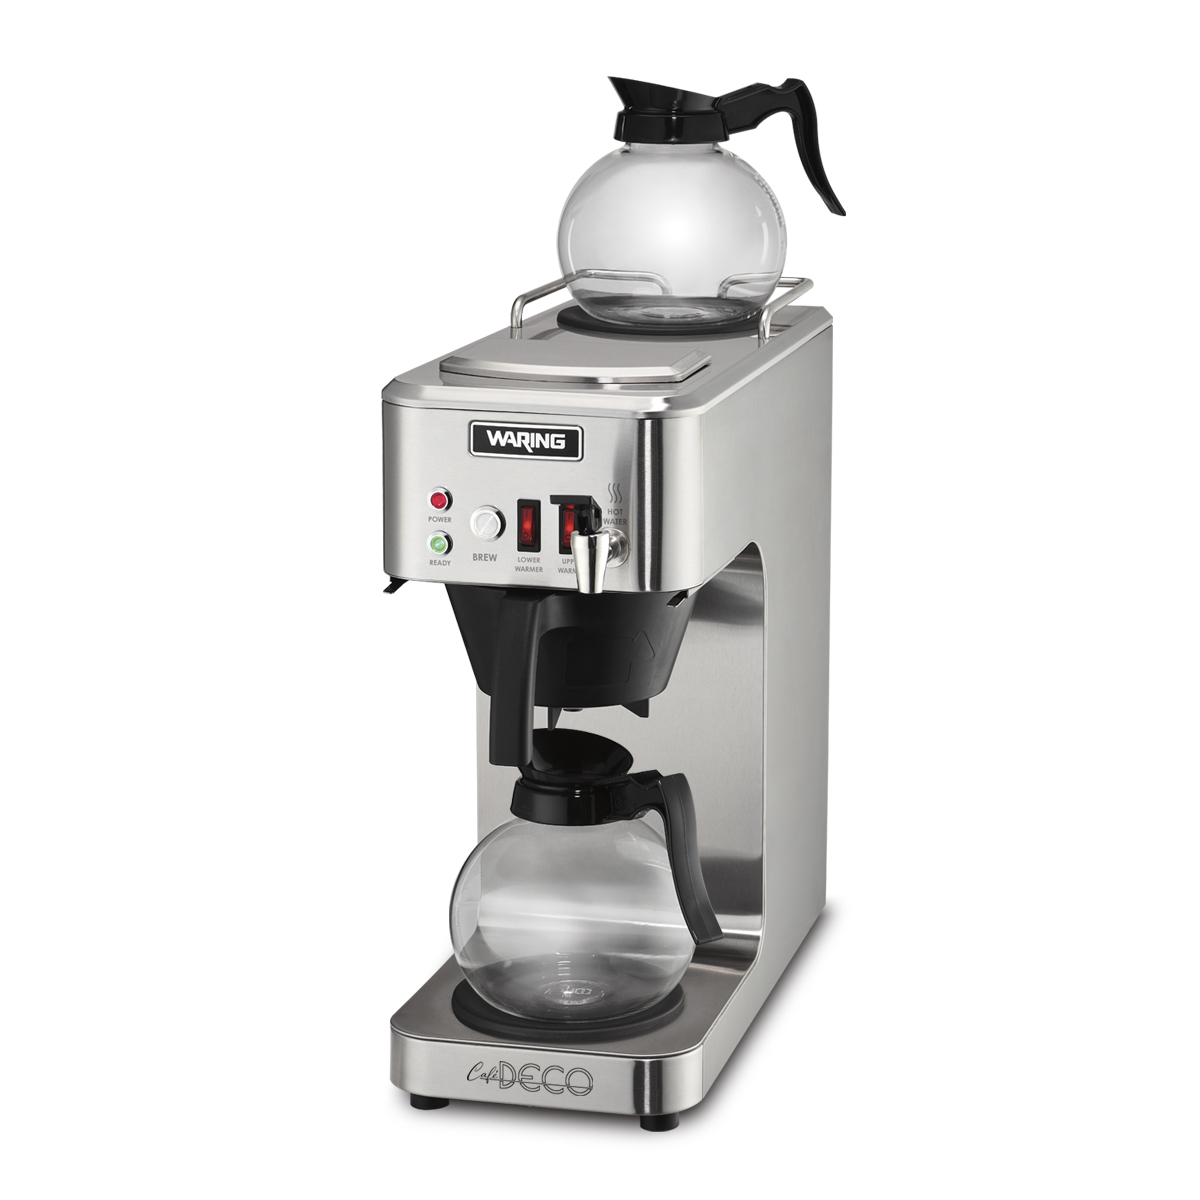 https://www.waringcommercialproducts.com/files/products/wcm50p-cafe-deco-automatic-coffee-brewer-inset-2-1200x1200.jpg